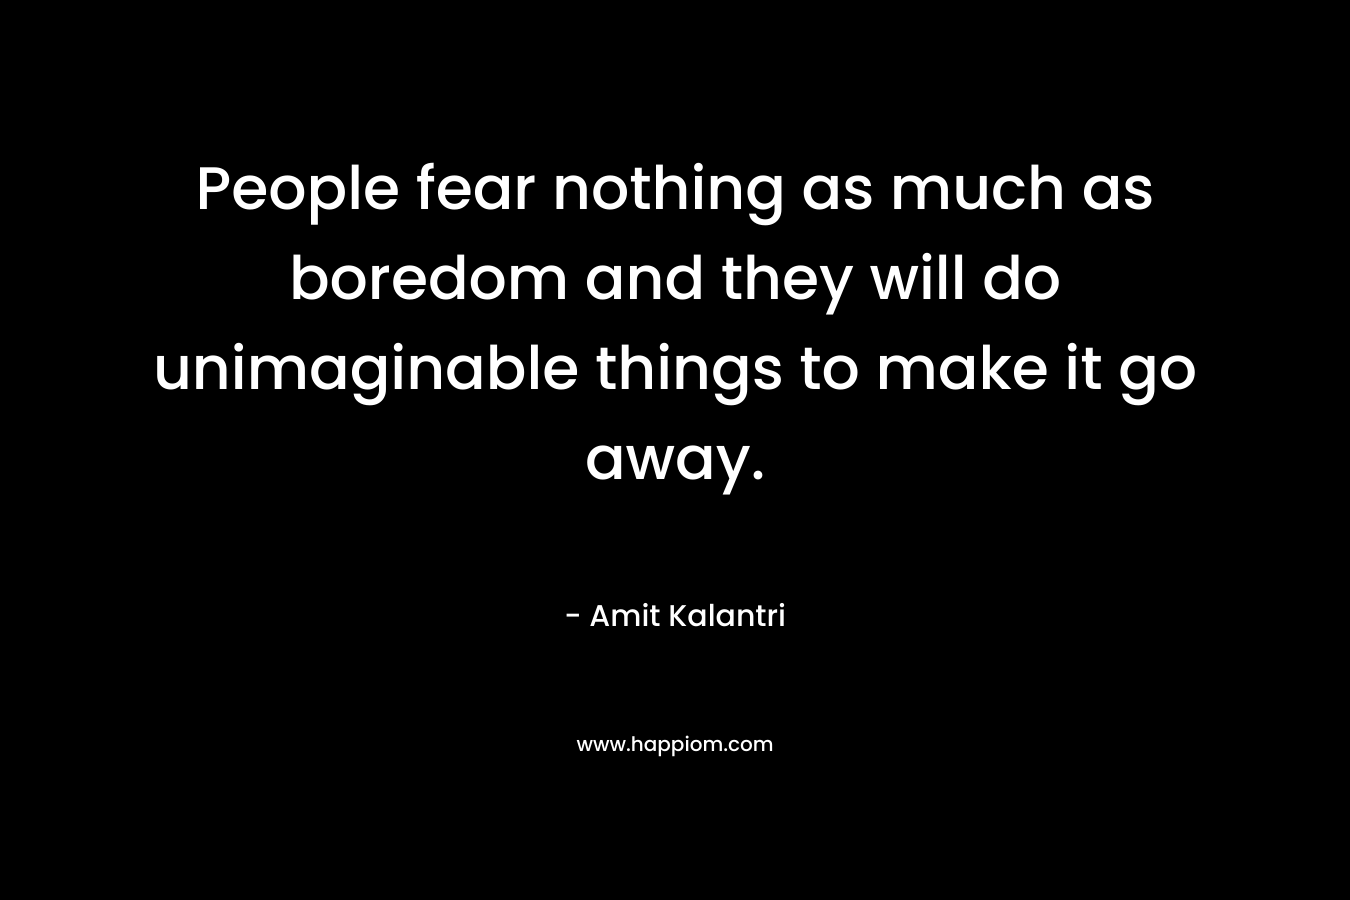 People fear nothing as much as boredom and they will do unimaginable things to make it go away.